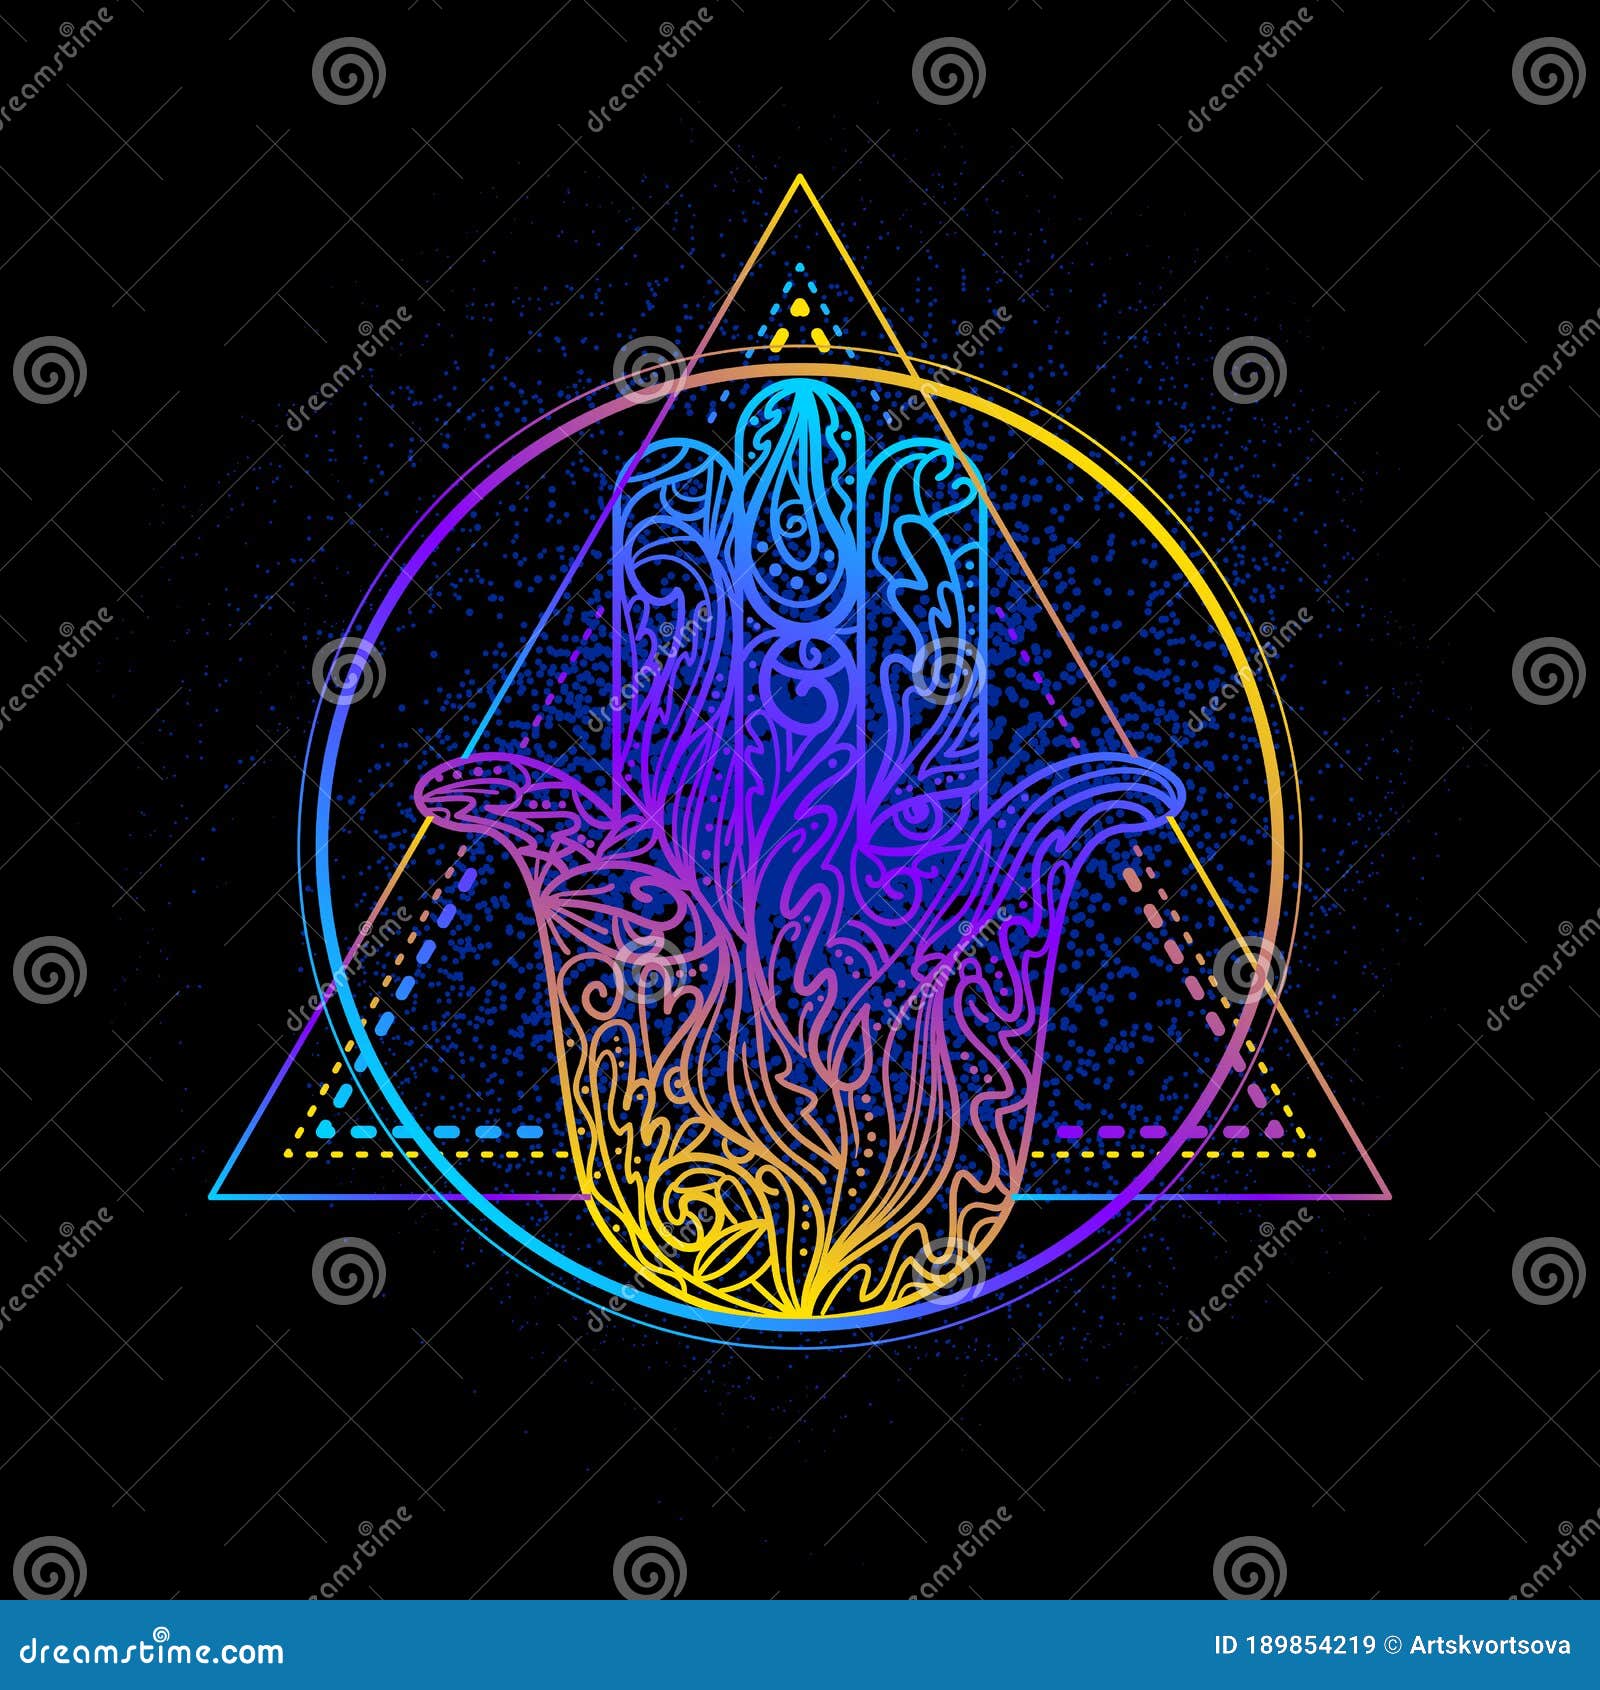 Sacred Geometry and Boo symbol set. Ayurveda sign of harmony and balance.  Tattoo design, yoga logo, t-shirt textile. Colorful gradient over black.  Astrology, esoteric, religion. Stock Image | VectorGrove - Royalty Free